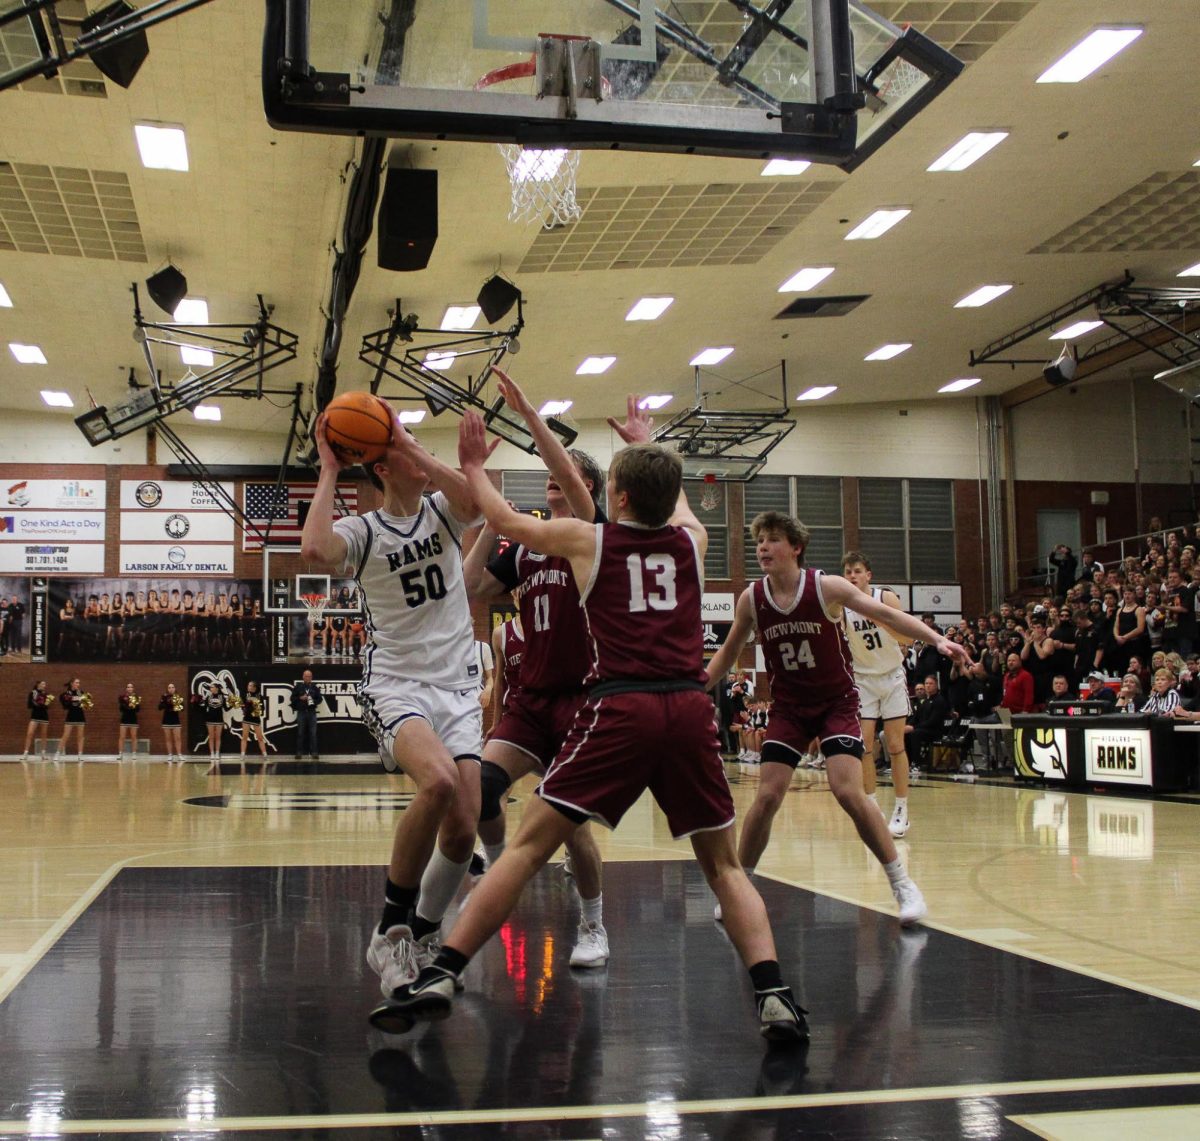 George Mcconkie drives the basket at the first playoff game on February 21 